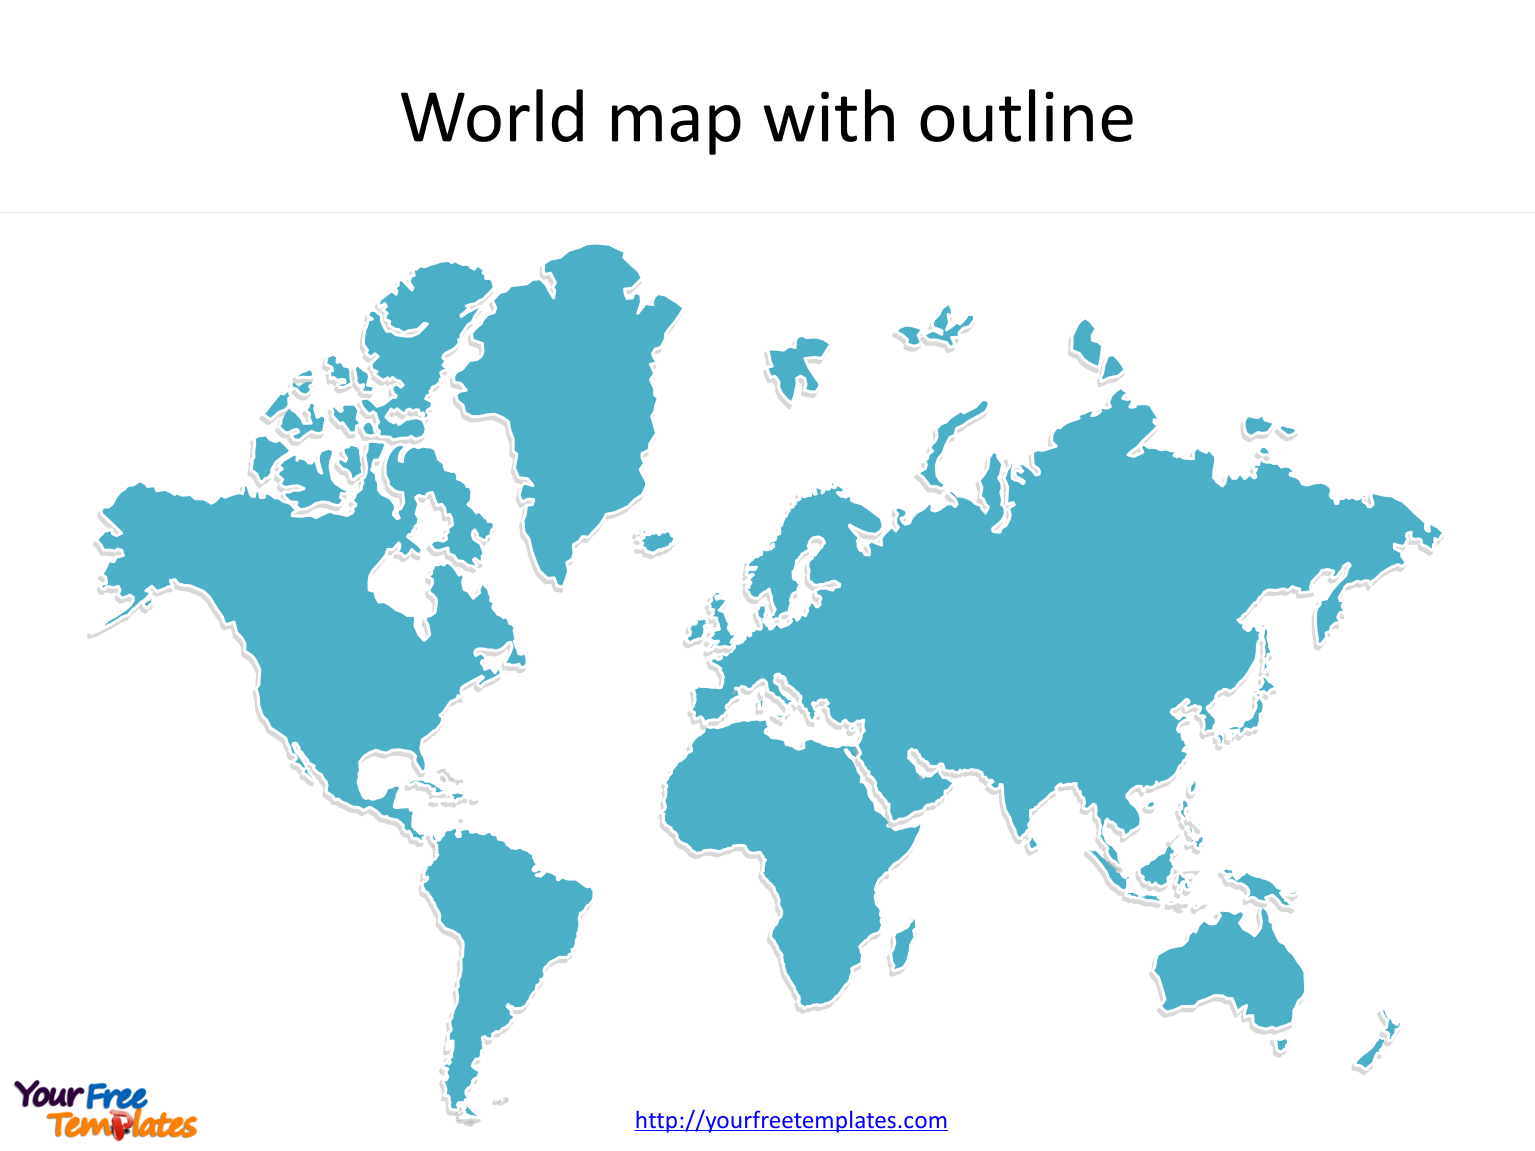 World blank template free. Maps clipart word map